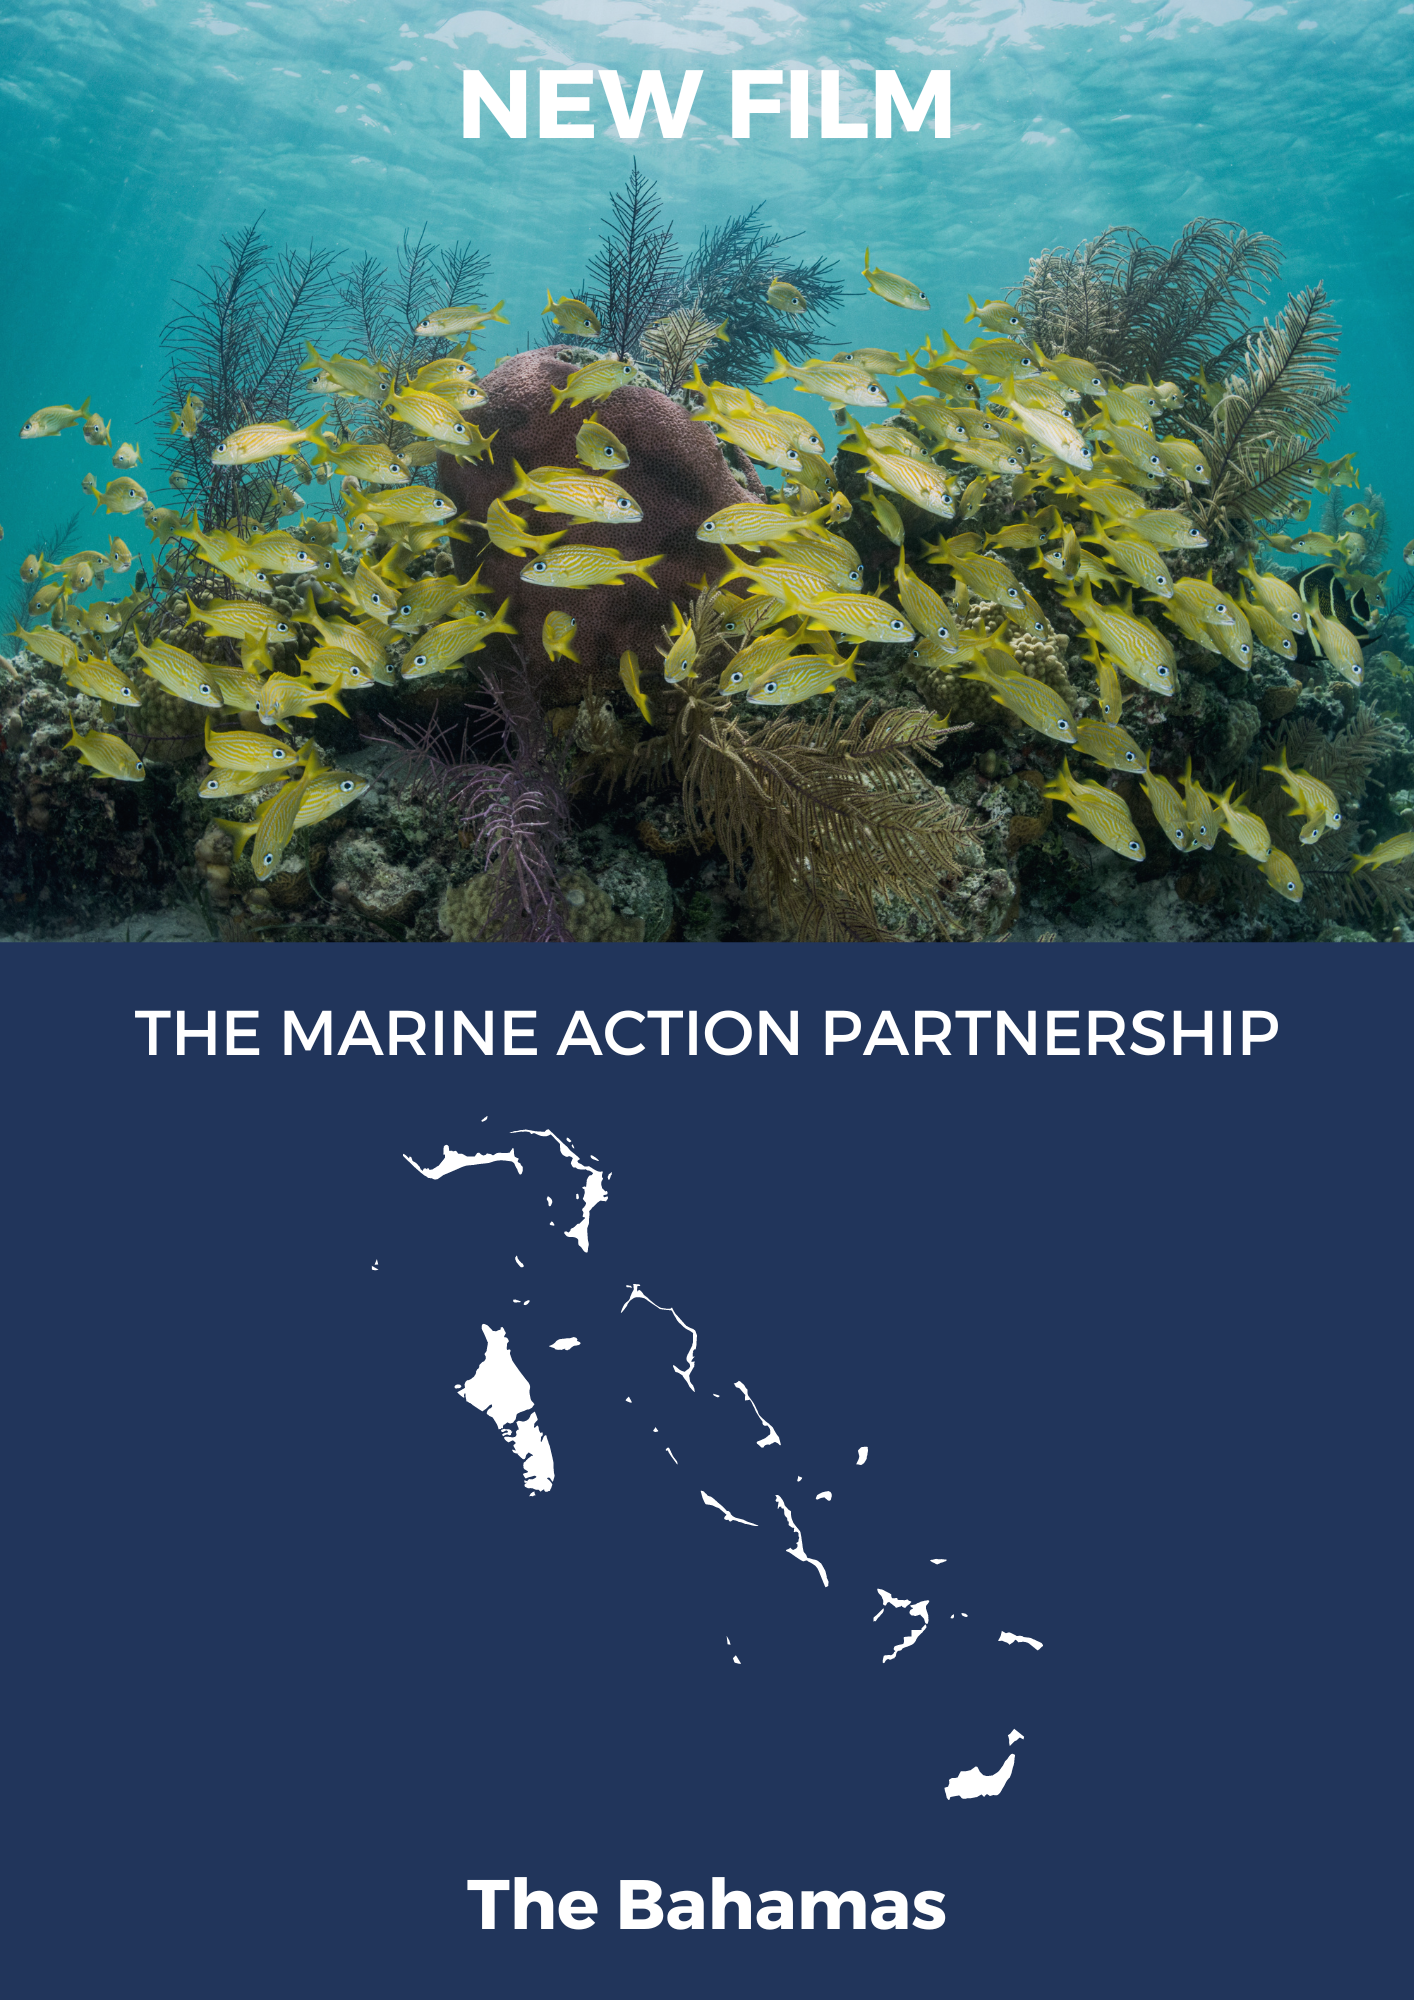 Watch Now: The Marine Action Partnership